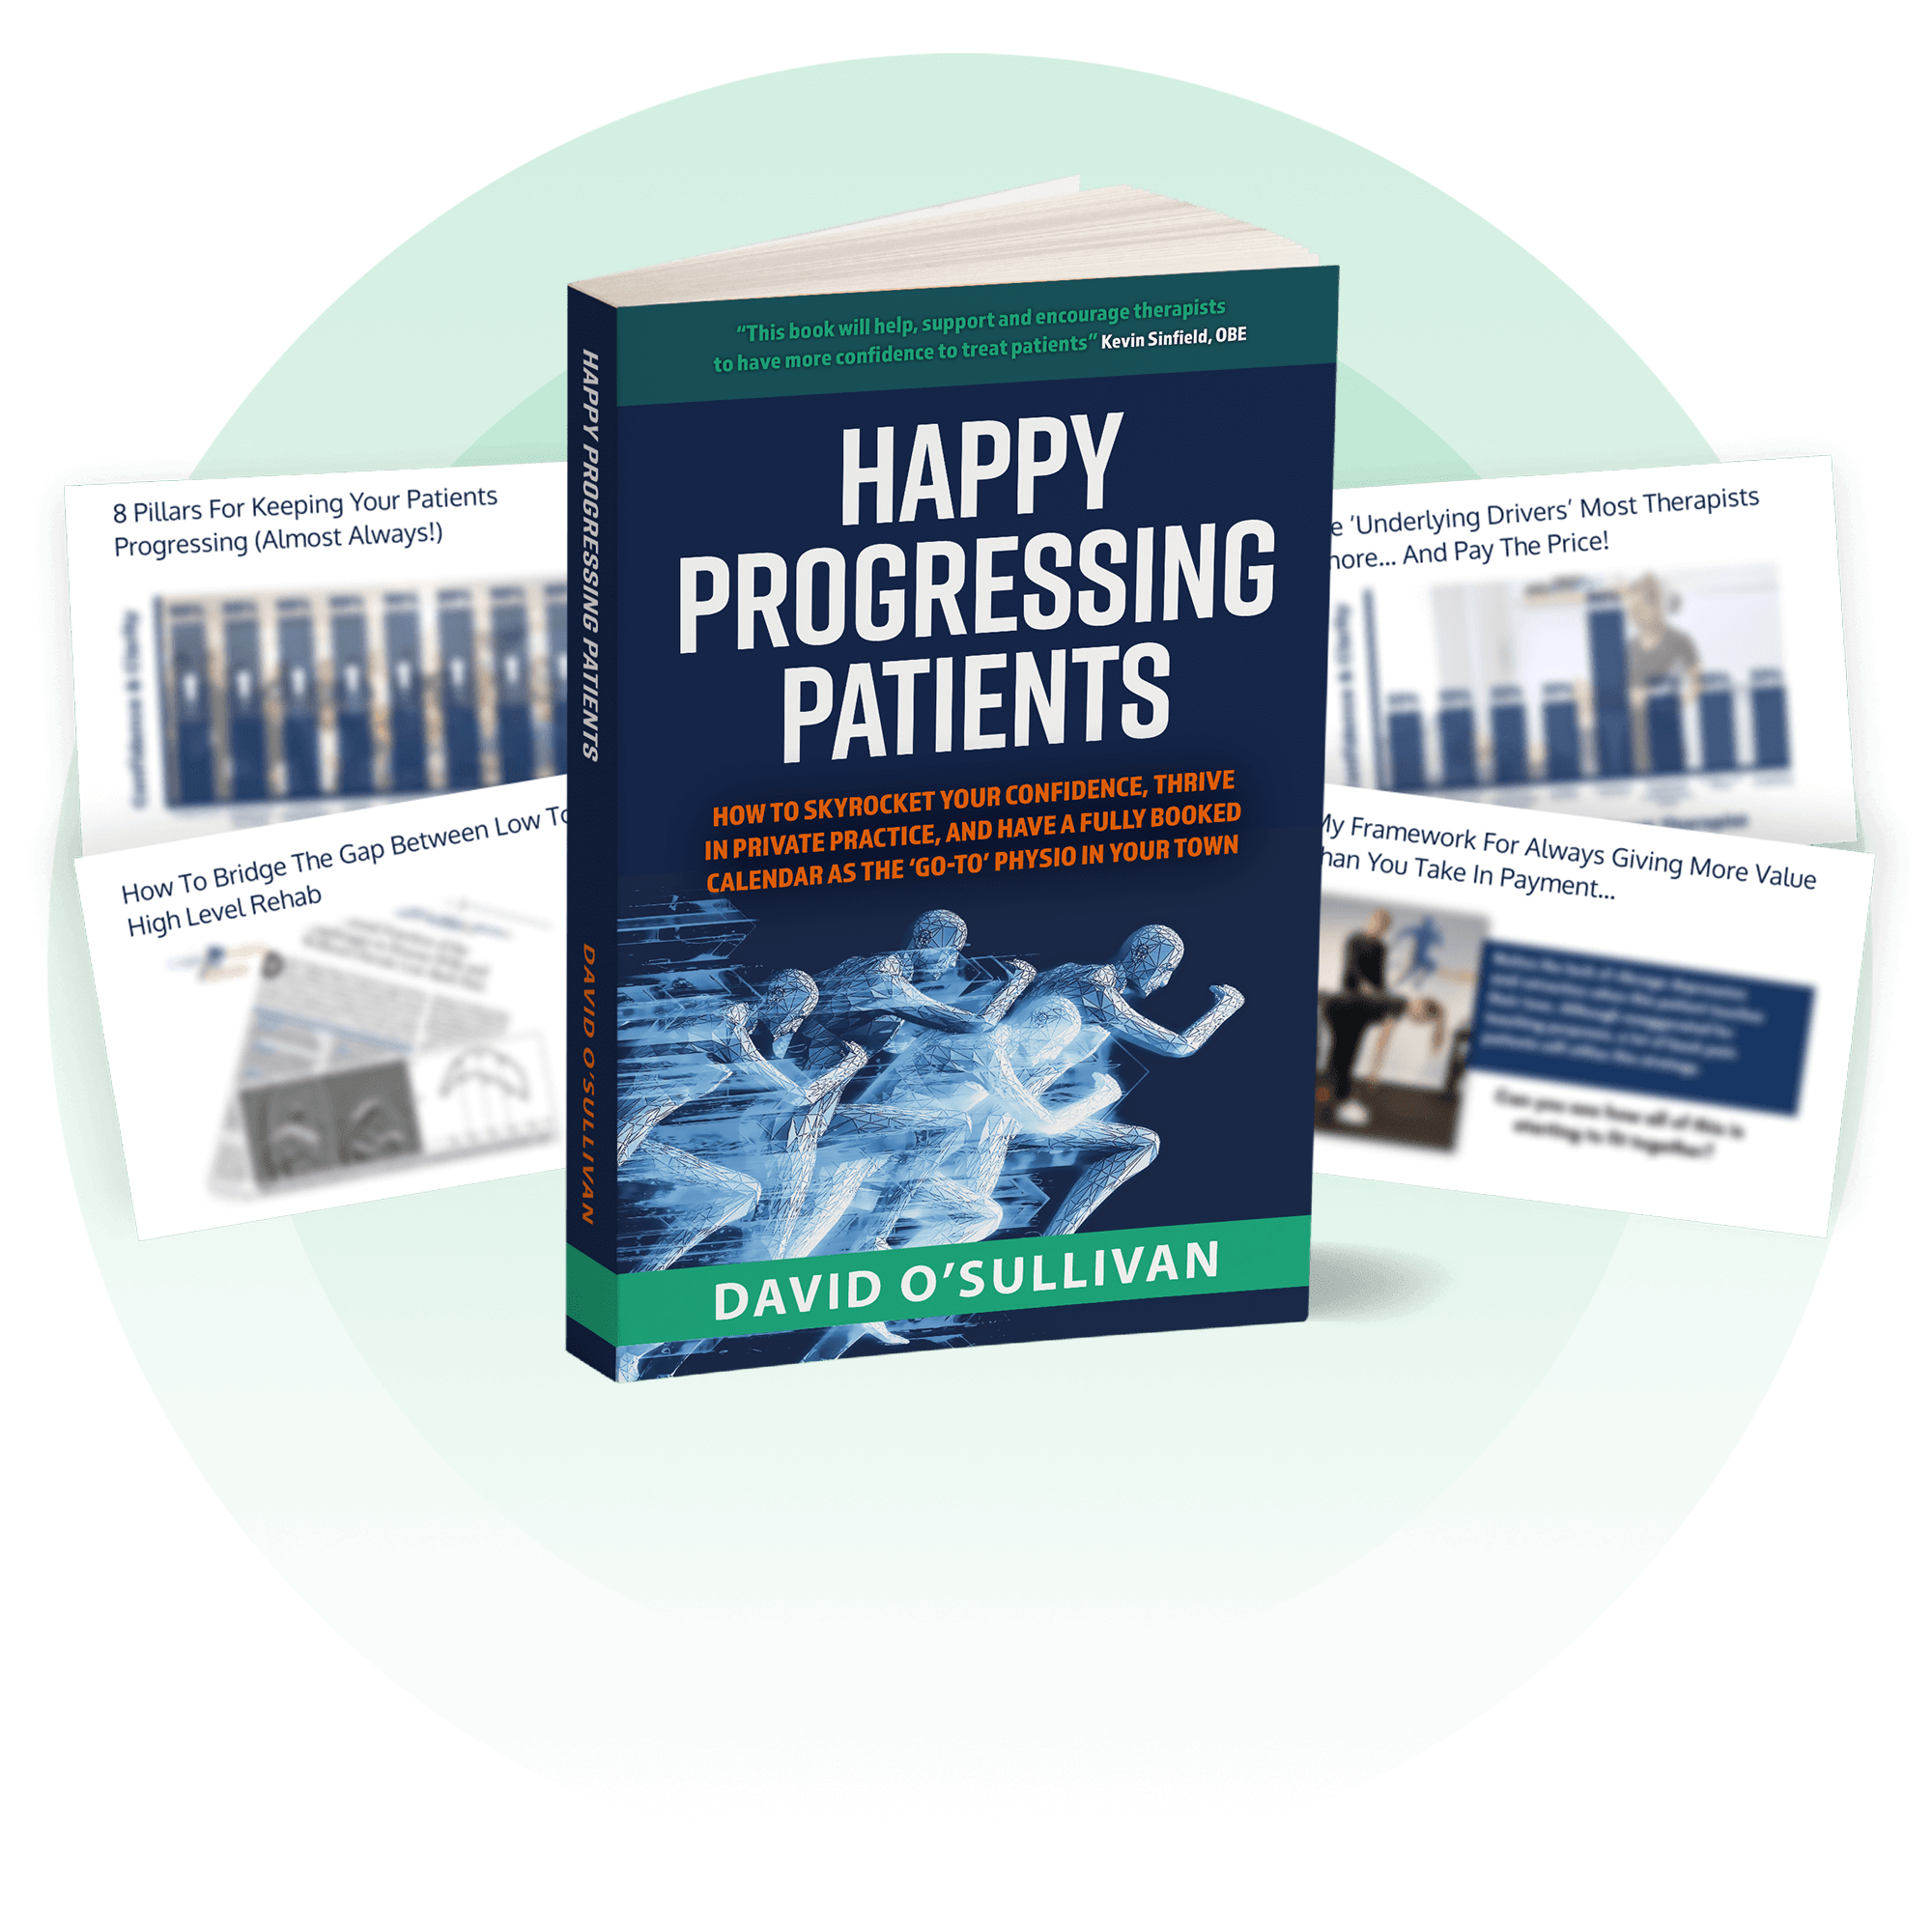 England World Cup Physio Reveals Secrets In #1 Bestseller Book, Happy Progressing Patients